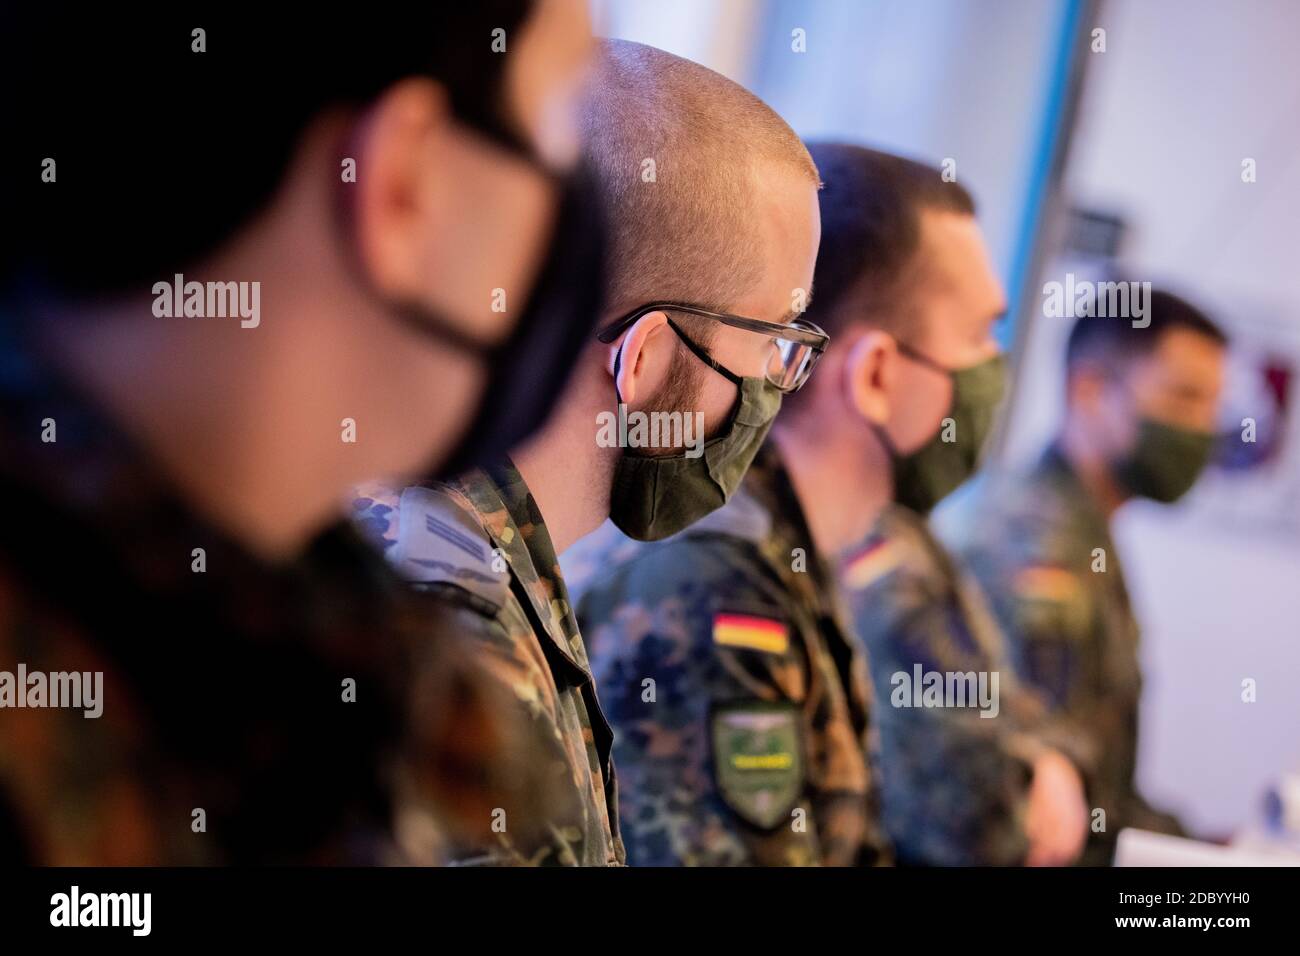 Grevenbroich, Germany. 18th Nov, 2020. Soldiers of the Bundeswehr are in training for contact tracing at the public health department. This is also where Bundeswehr soldiers are trained for Corona Aid. Credit: Rolf Vennenbernd/dpa/Alamy Live News Stock Photo